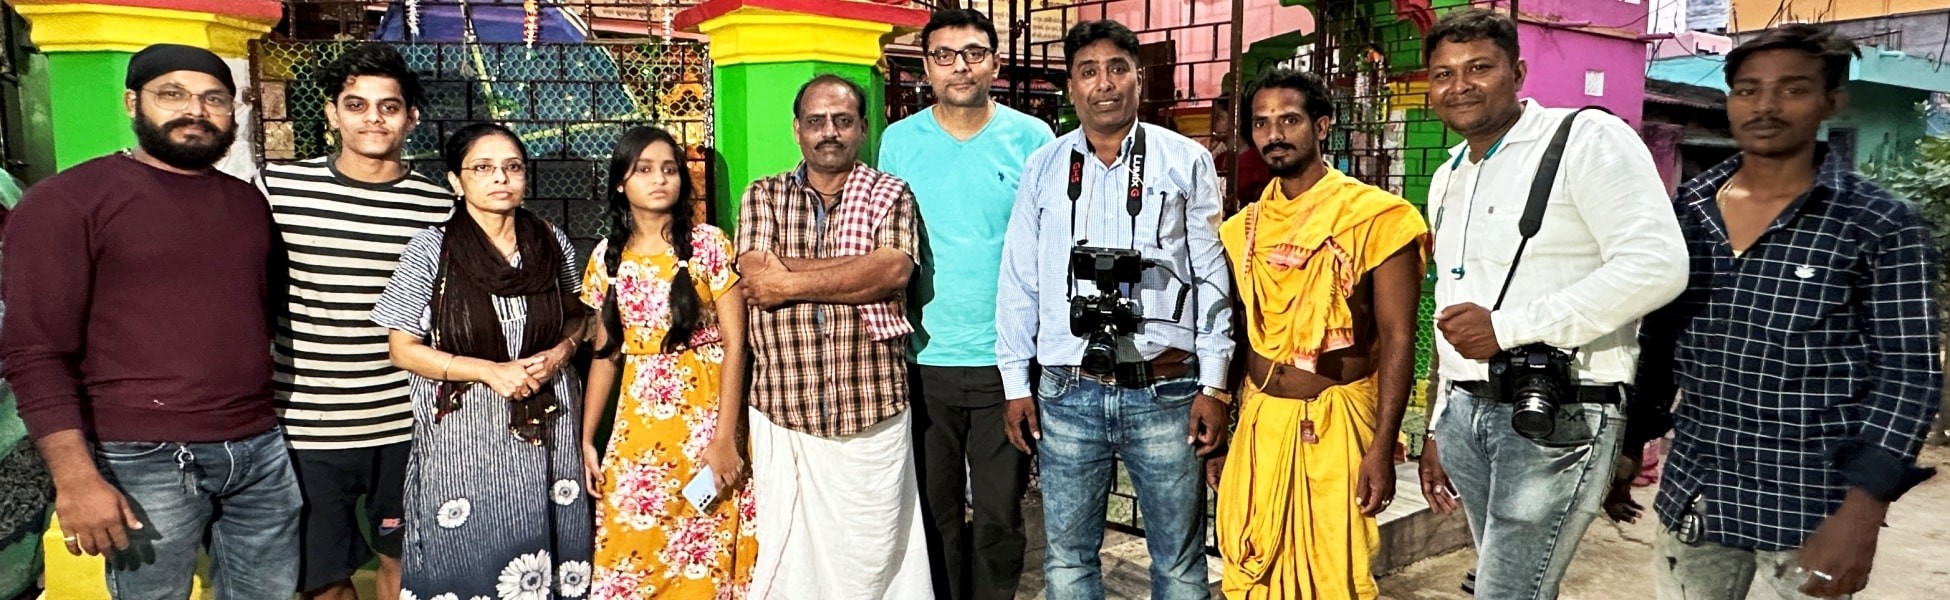 film production house in Samastipur, video production house in Samastipur, tv production house in Samastipur, production house in Samastipur, film production company in Samastipur, video production company in Samastipur, tv production company in Samastipur, production company in Samastipur